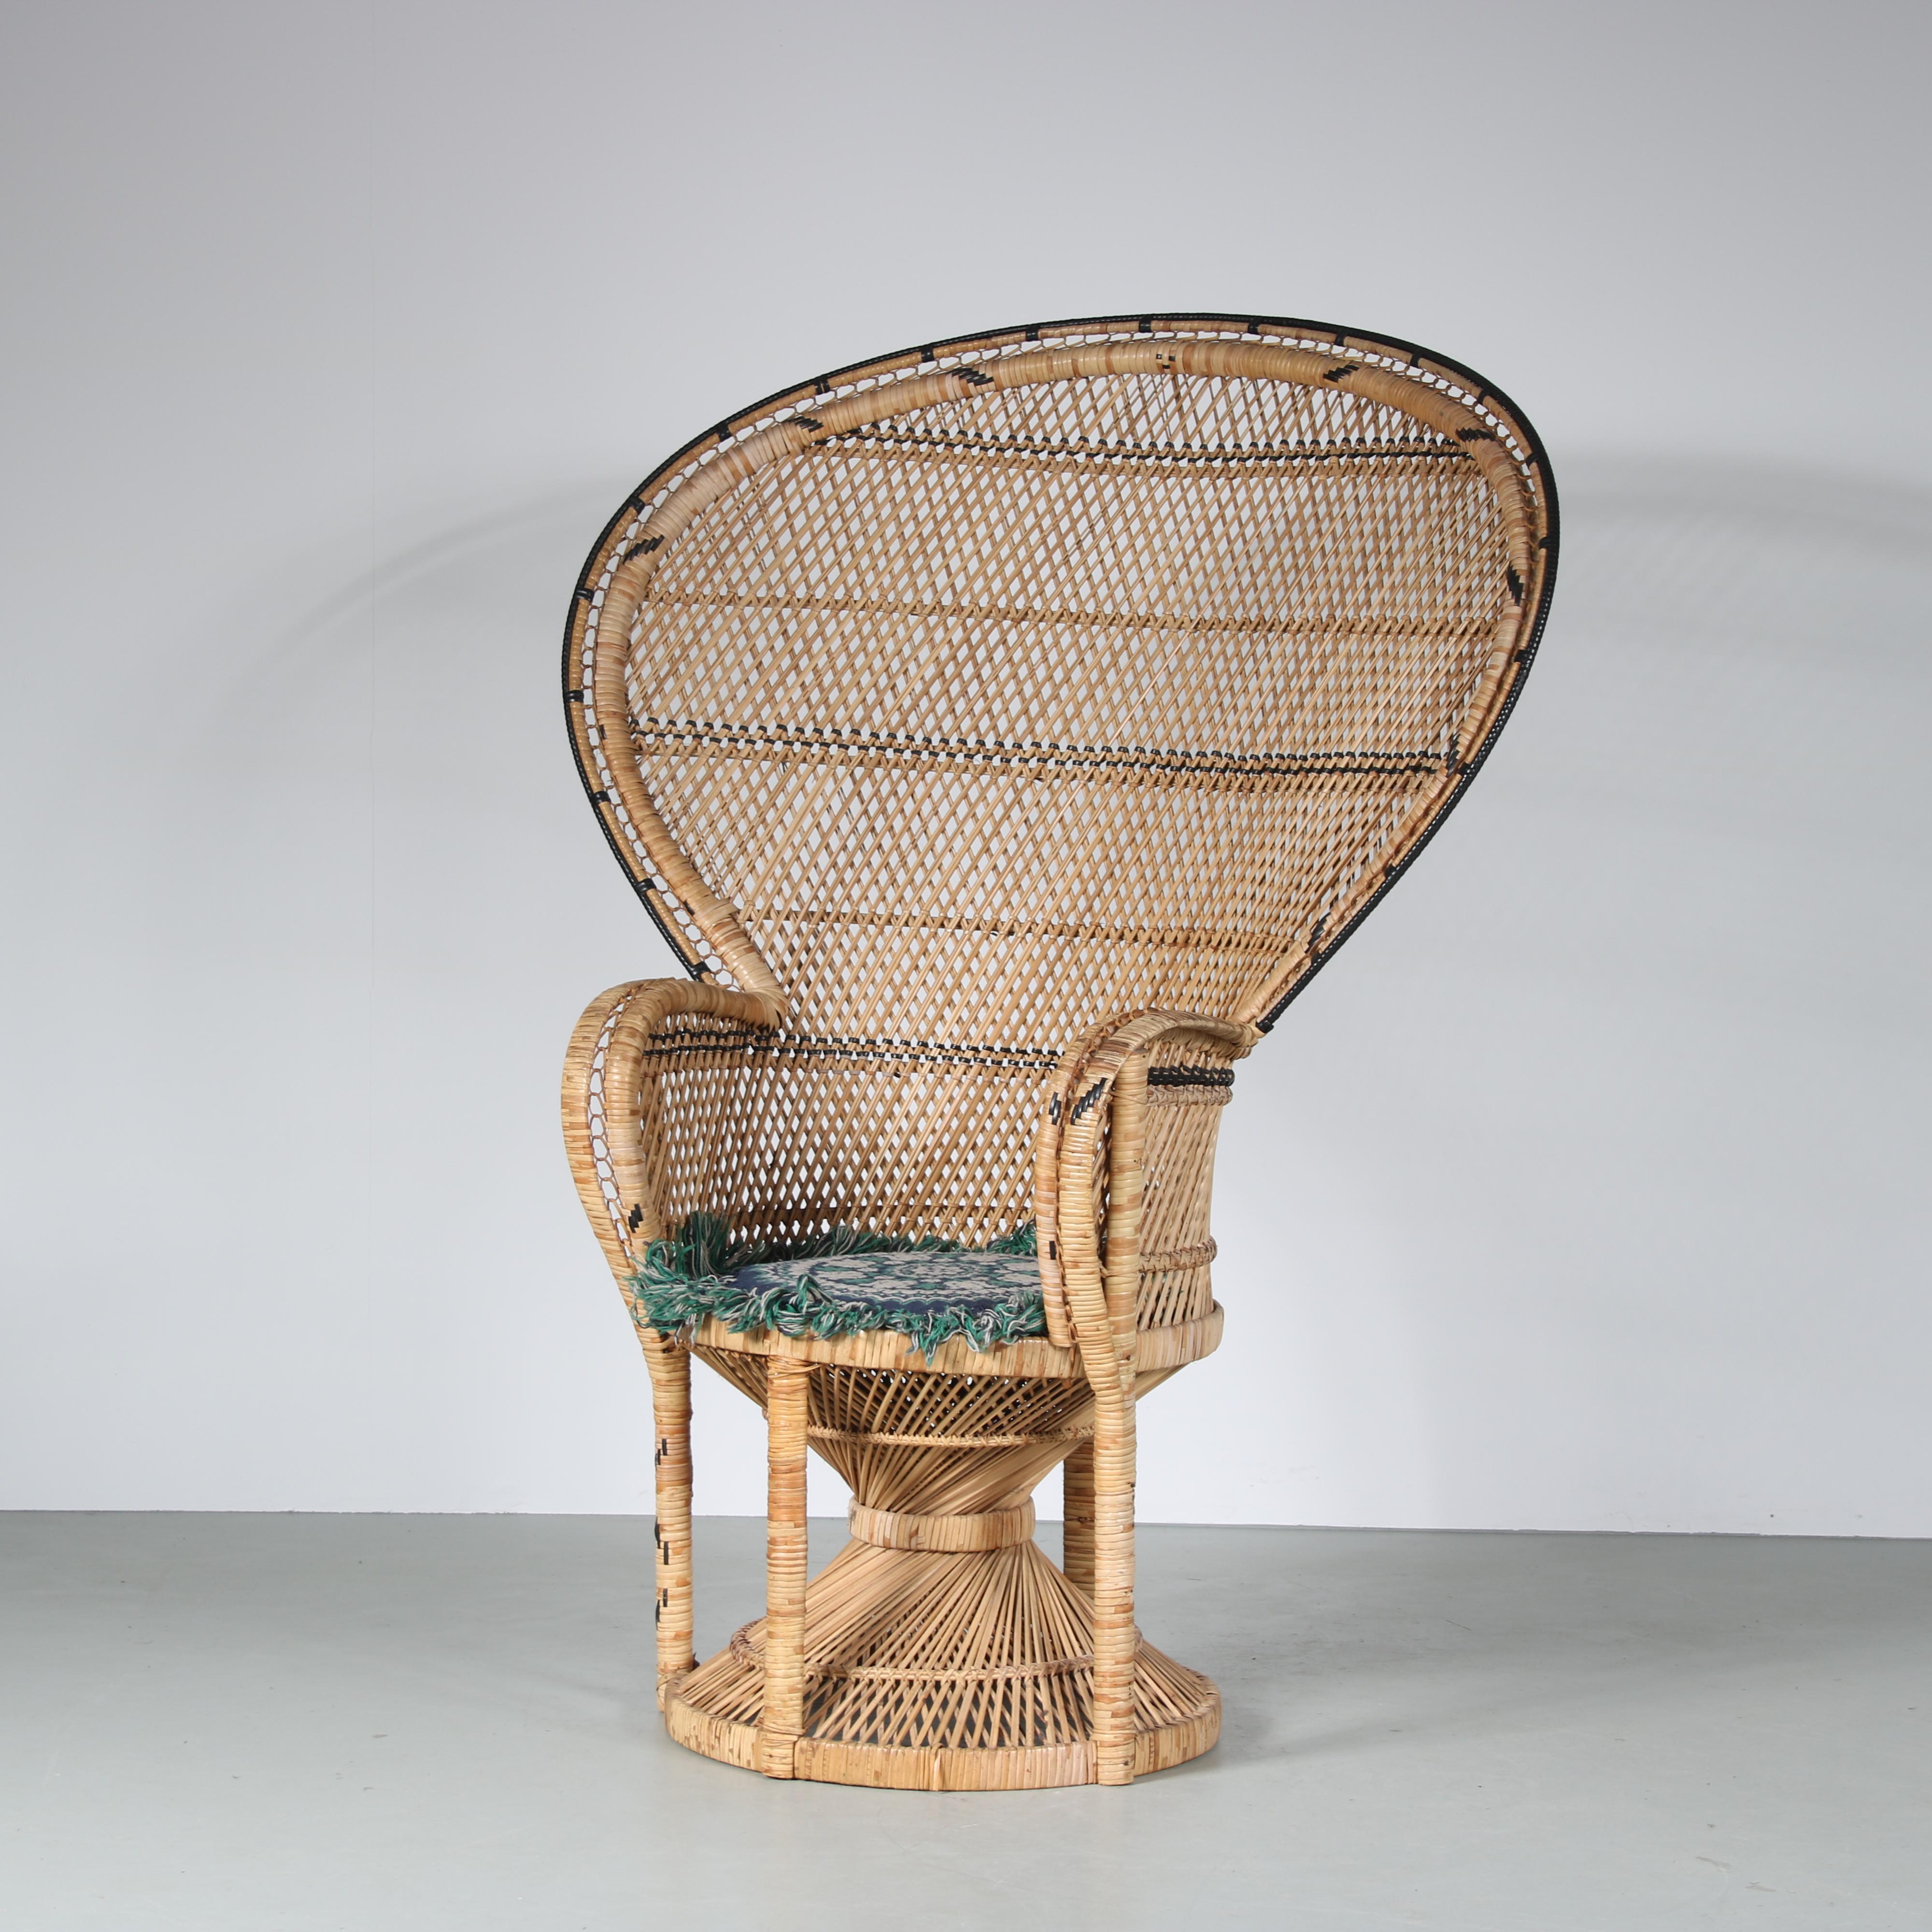 An eye-catching large “Peacock” easy chair by Kok Maisonette from France around 1960.

This impressive and highly recognizable piece is made of natural rattan in nice curved shapes. The tall, round and decorative backrest gives this piece an